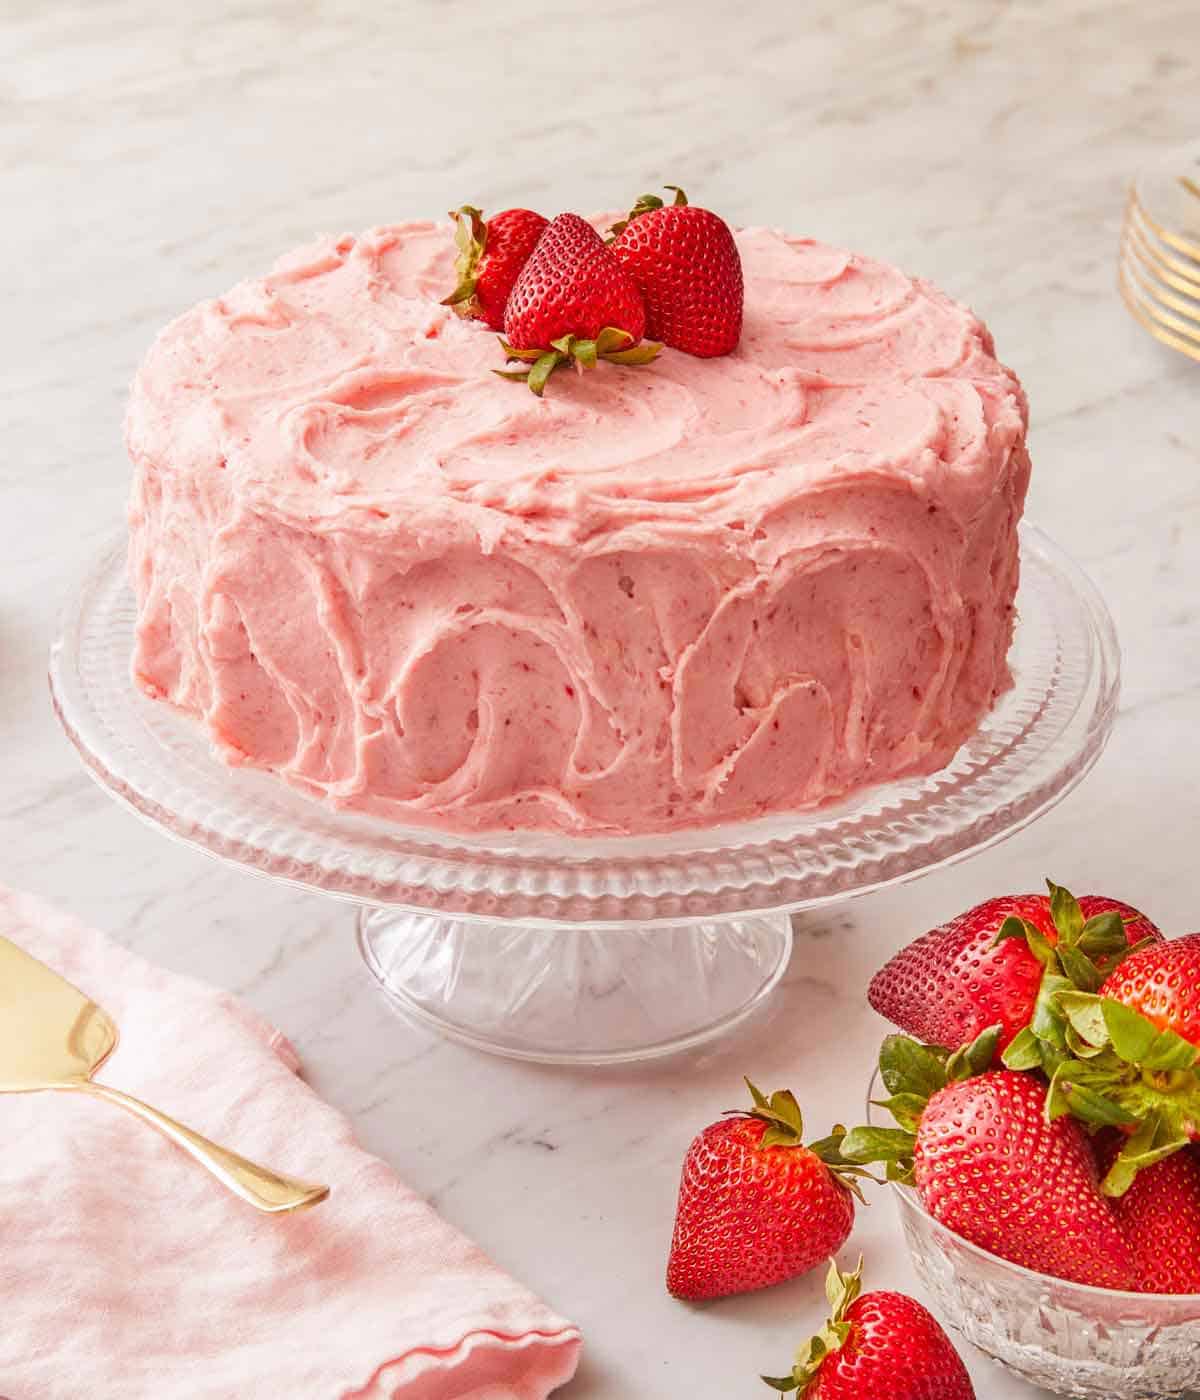 A strawberry cake on a cake stand with fresh strawberries on top and on the side.